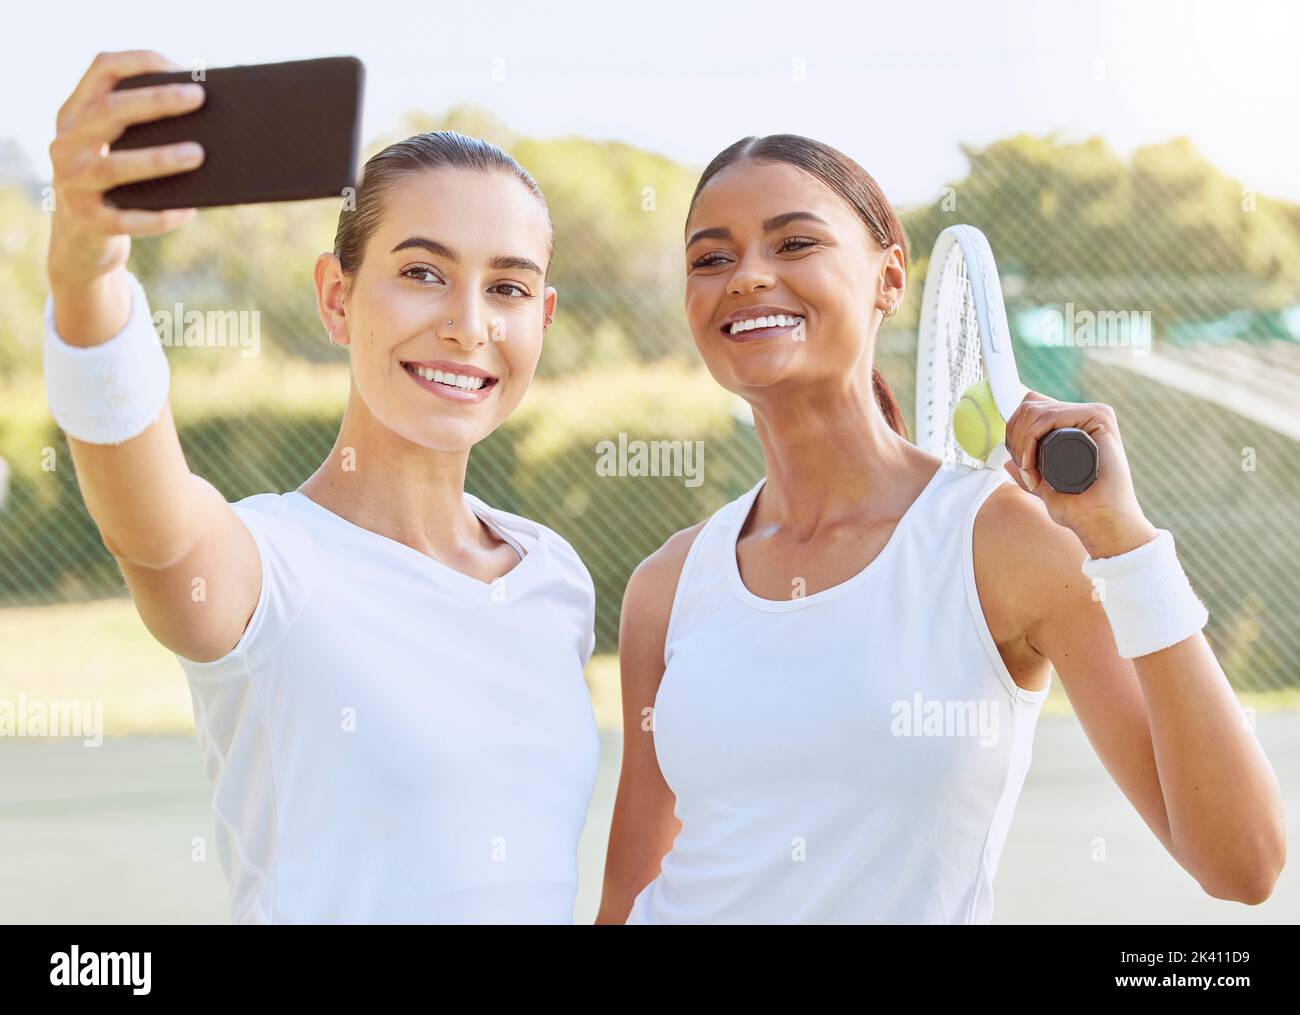 Tennis selfie, video call phone and women training on court together, happy with sports game and talking on smartphone. Athlete team taking photo on Stock Photo